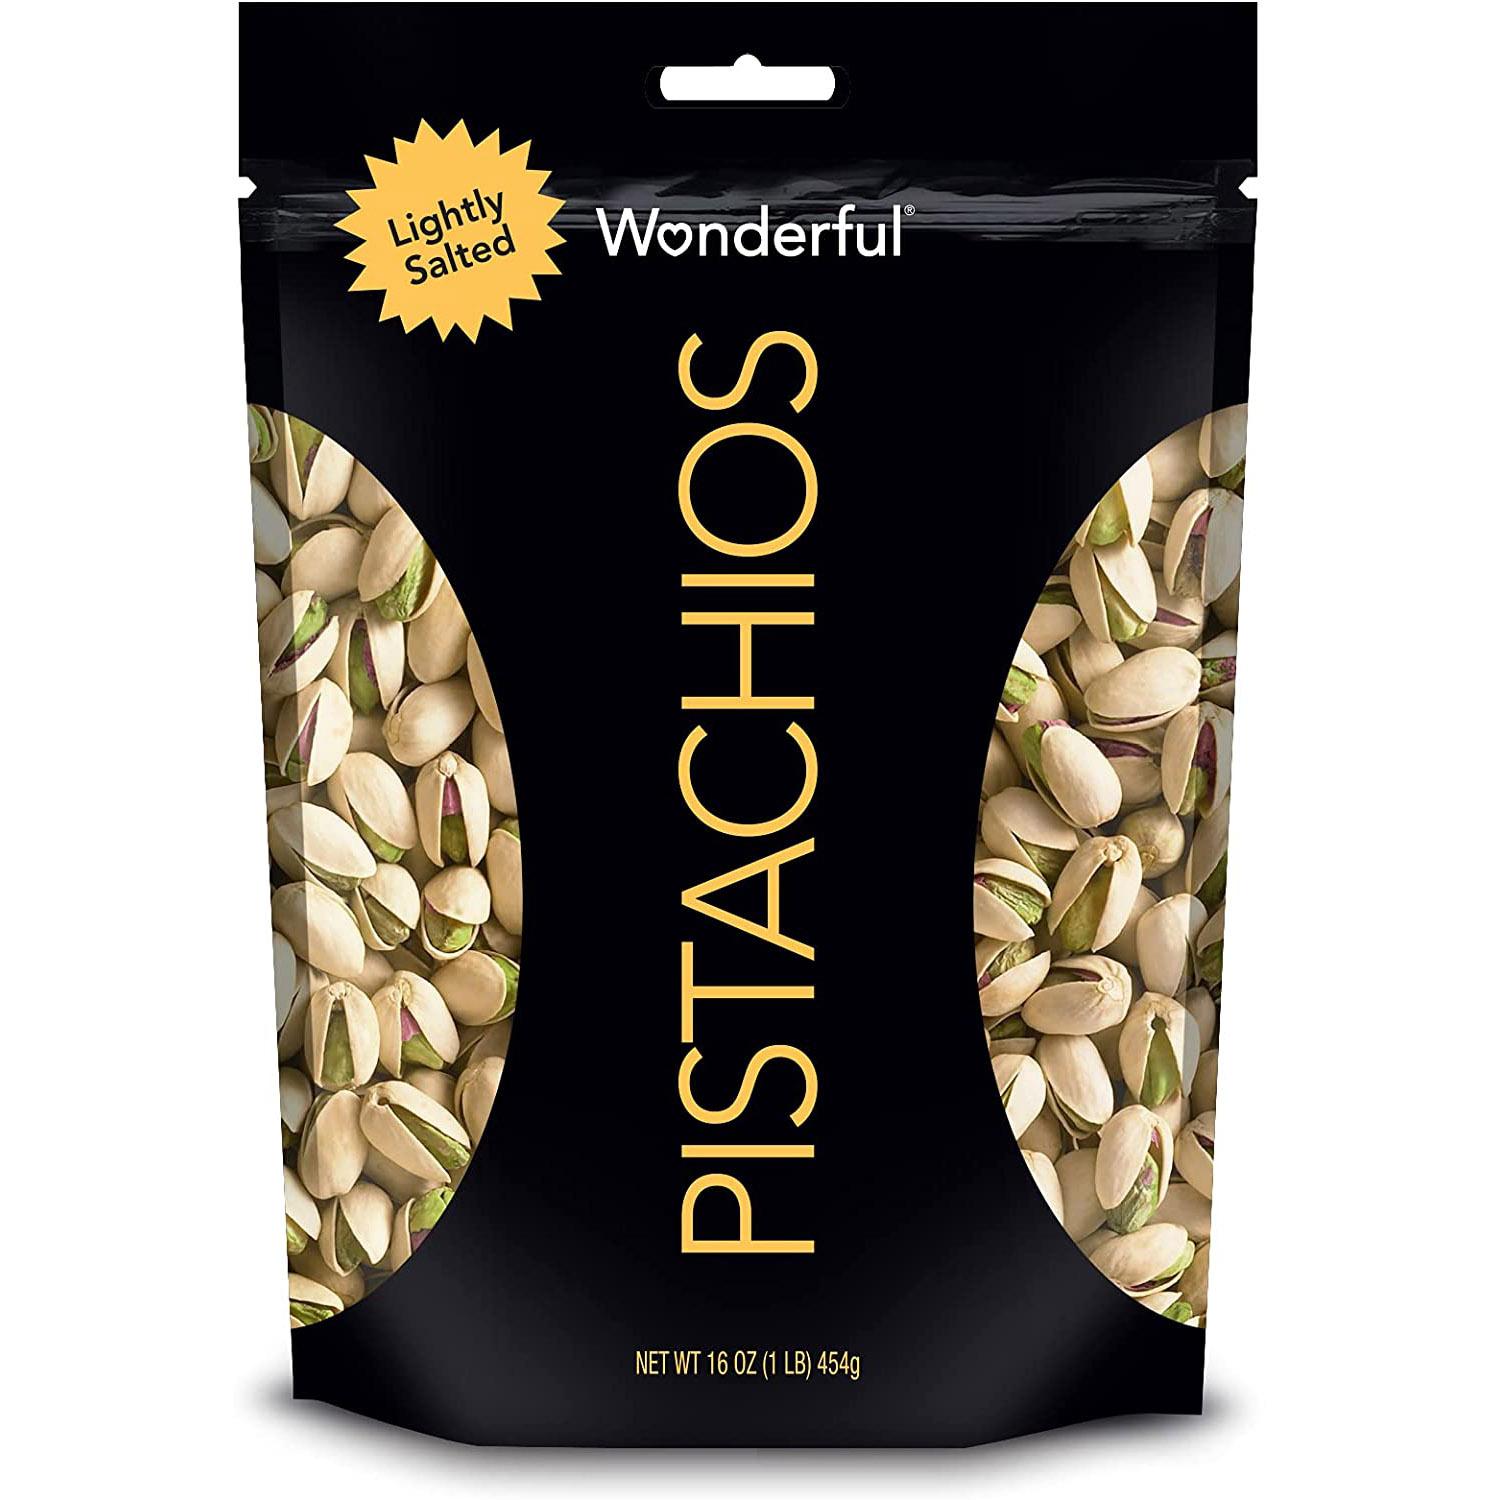 16oz Wonderful Pistachios Roasted Lightly Salted for $5.69 Shipped